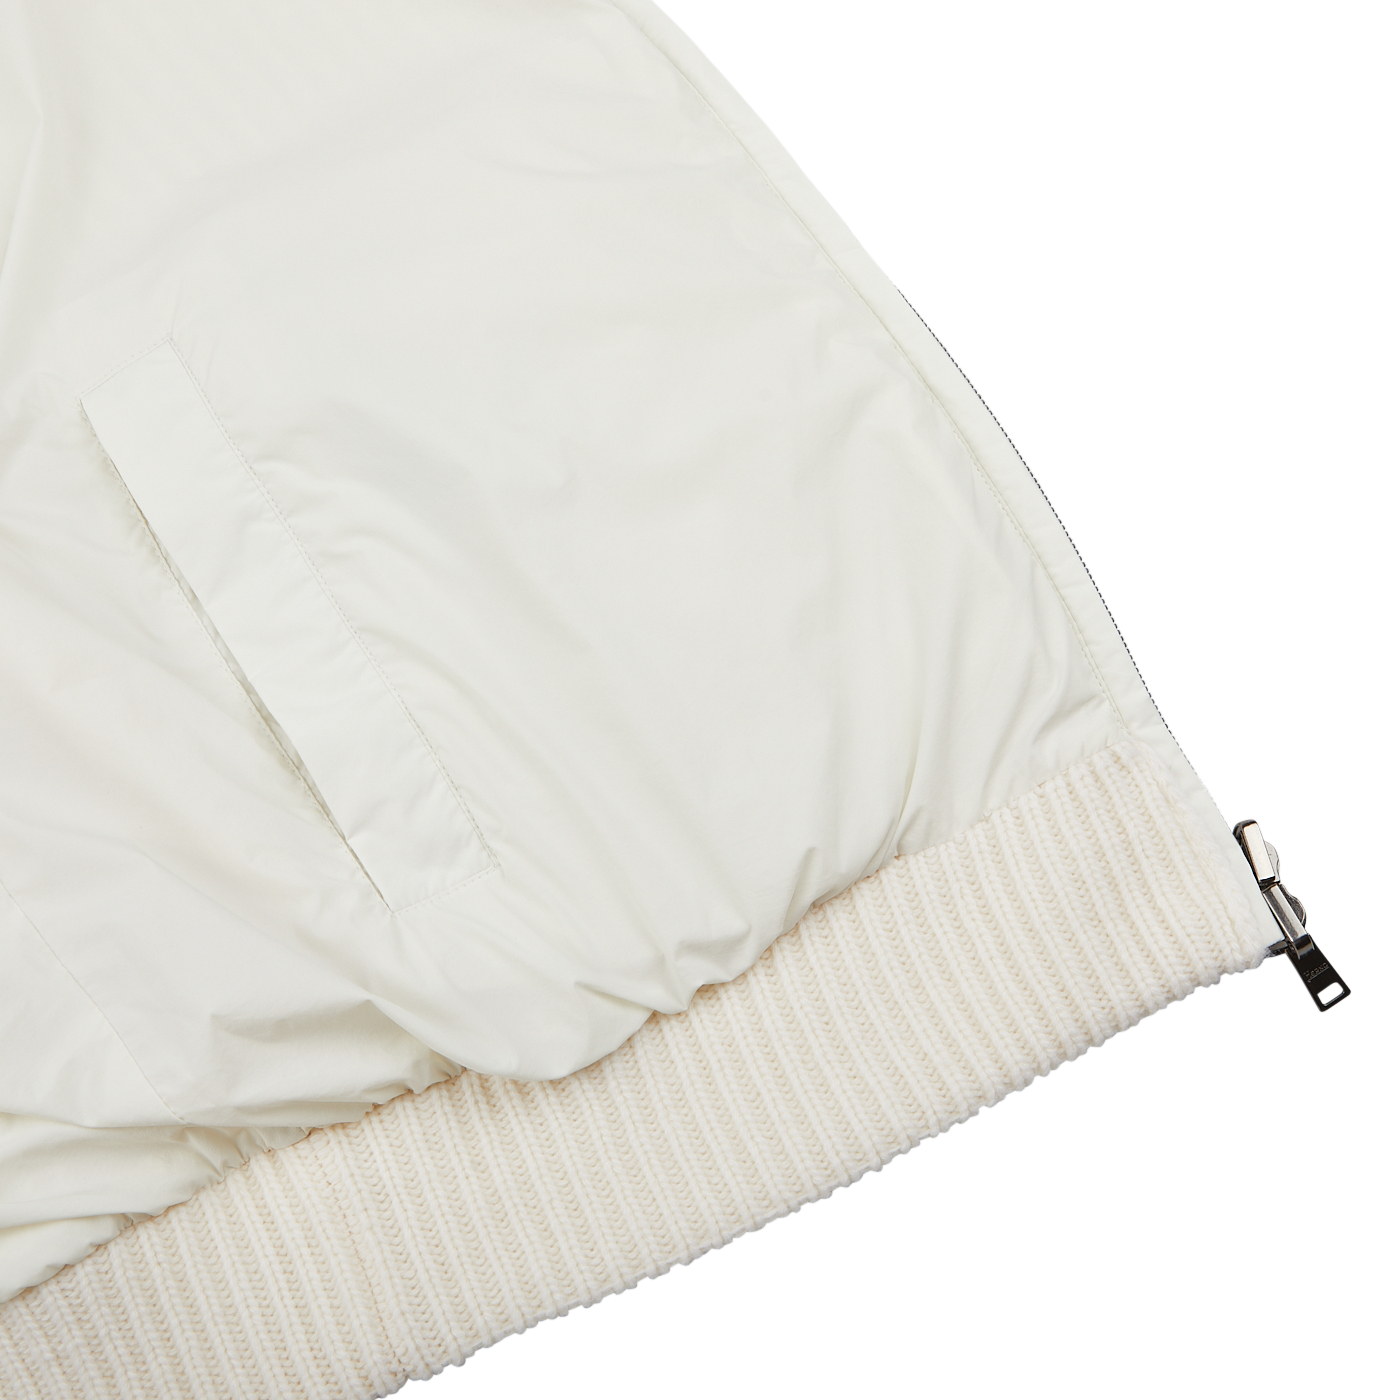 Close-up image of the lower portion of the Herno Cream Wool Nylon Reversible Knitted Jacket featuring a zippered pocket, ribbed hem, and a partial view of the zipper.